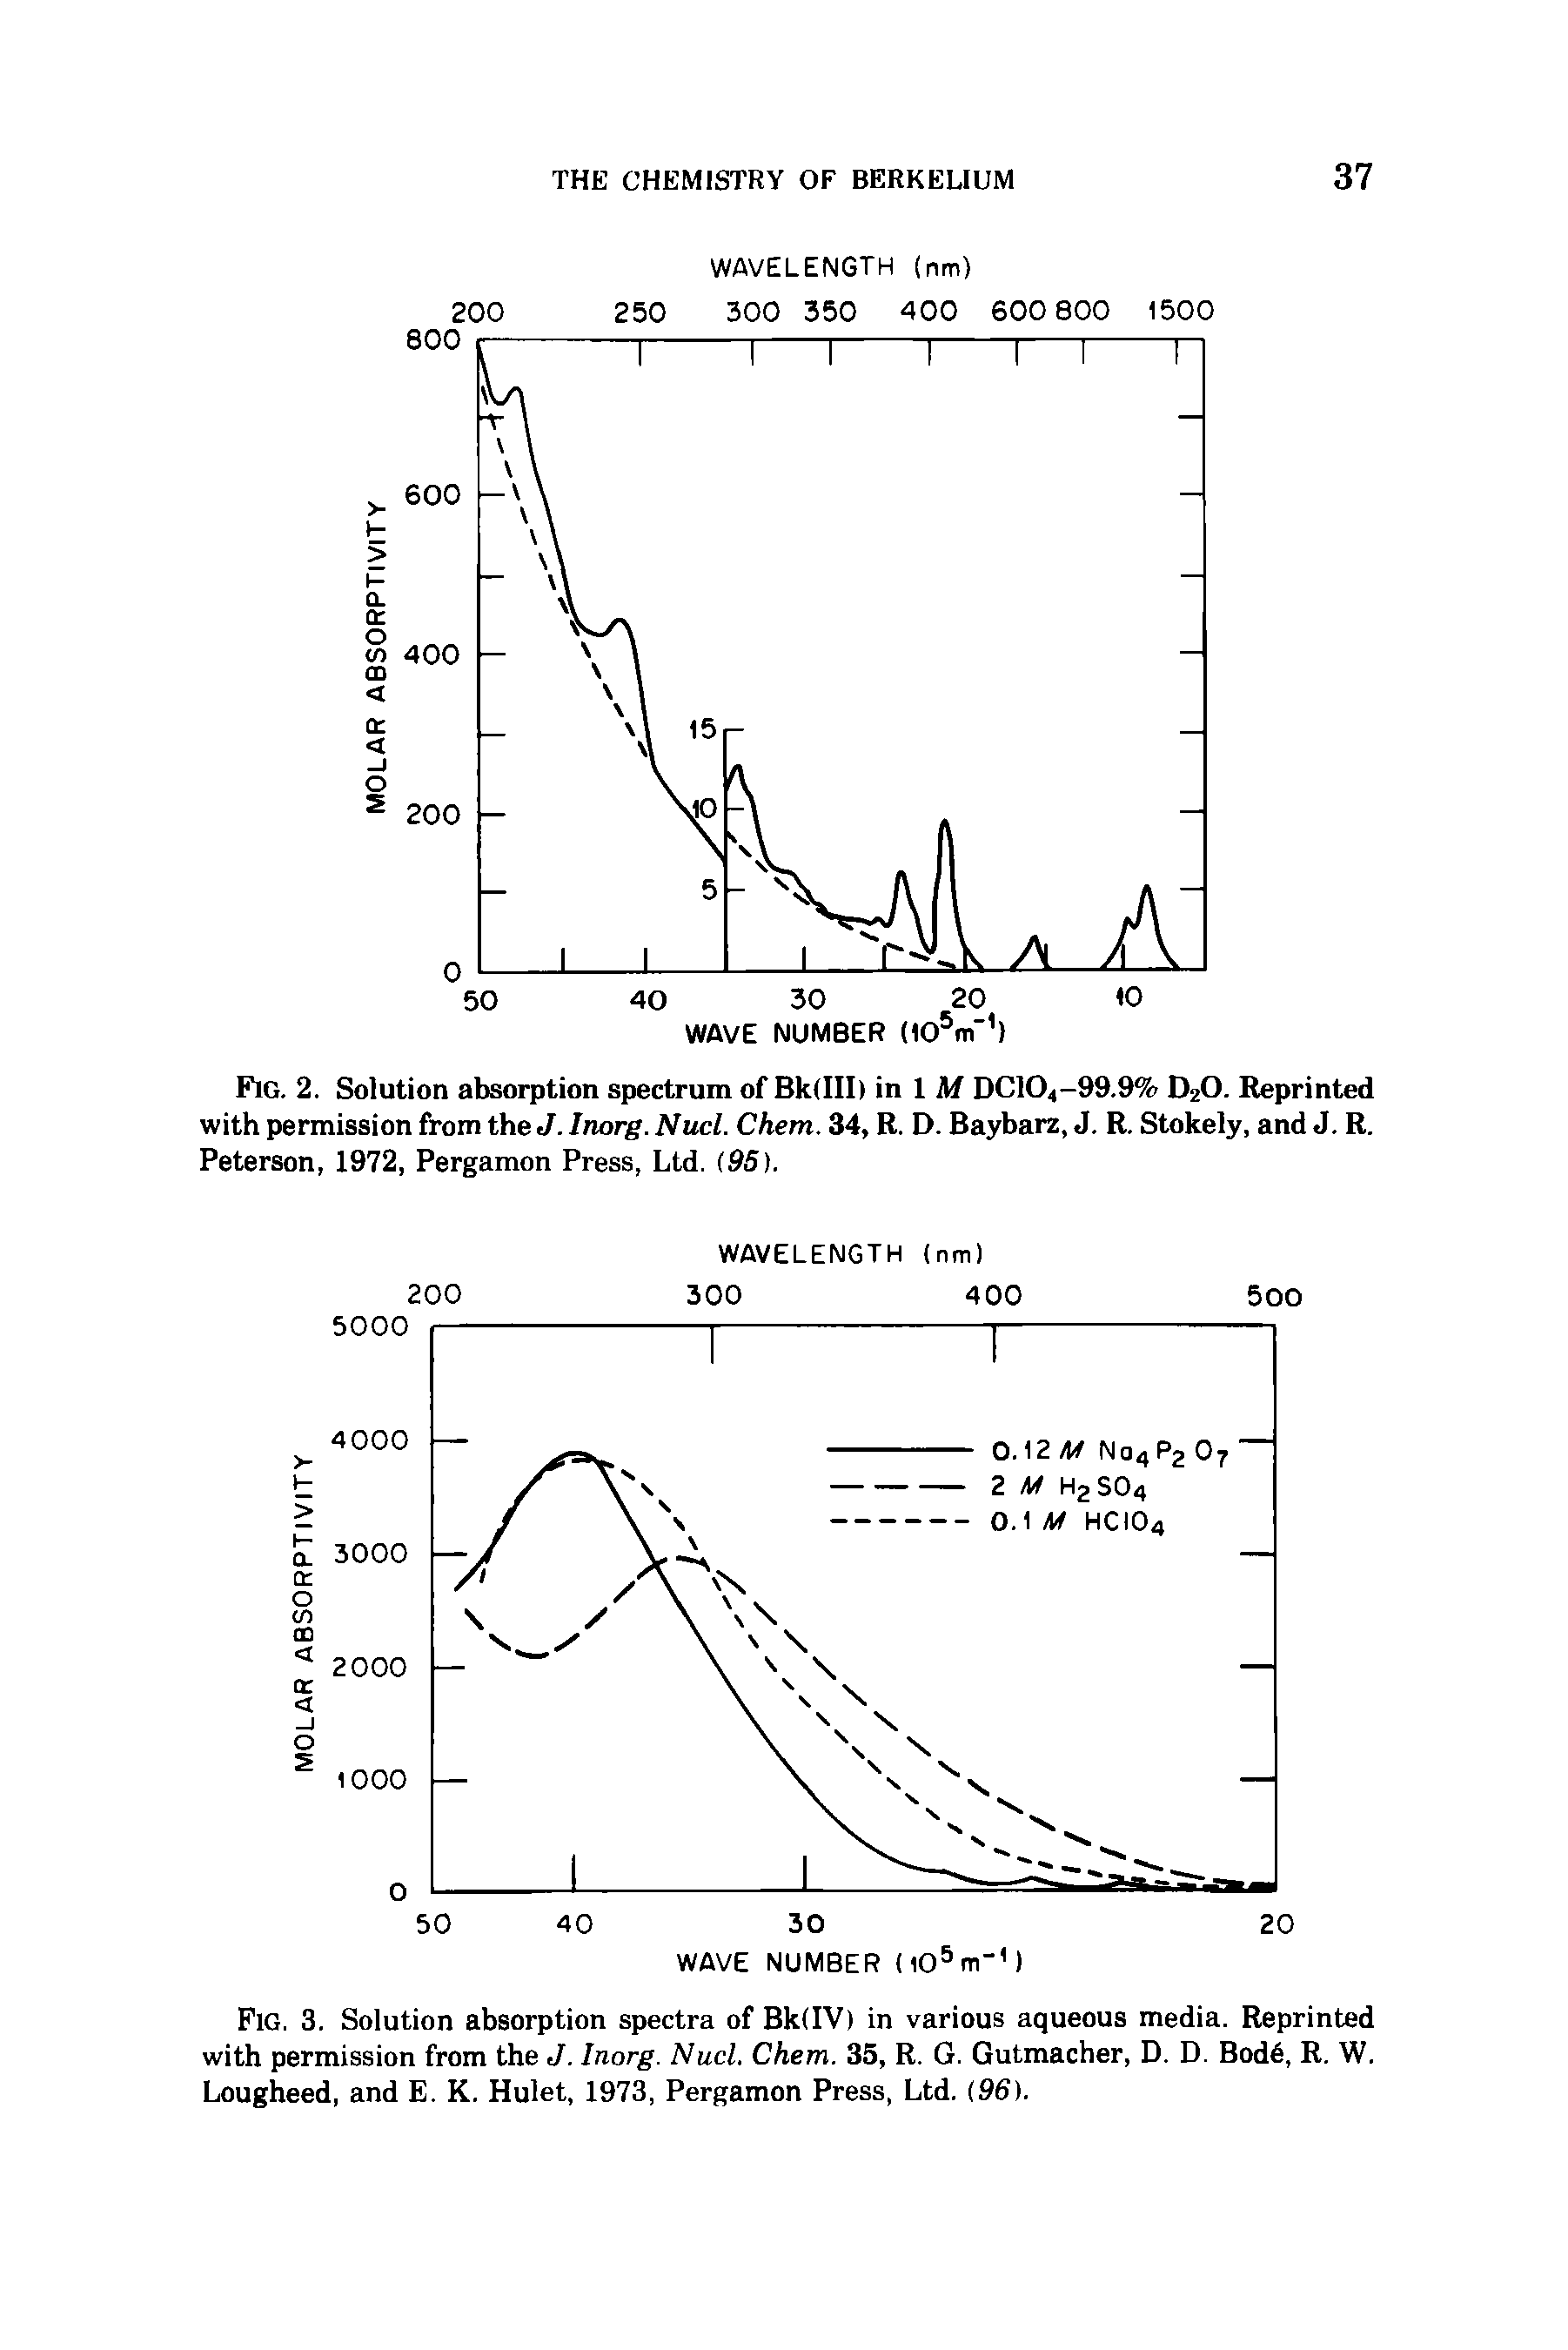 Fig. 2. Solution absorption spectrum of Bk(III) in 1 M DC104-99.9% D20. Reprinted with permission from the J. Inorg. Nucl. Chem. 34, R. D. Baybarz, J. R. Stokely, and J. R. Peterson, 1972, Pergamon Press, Ltd. (95).